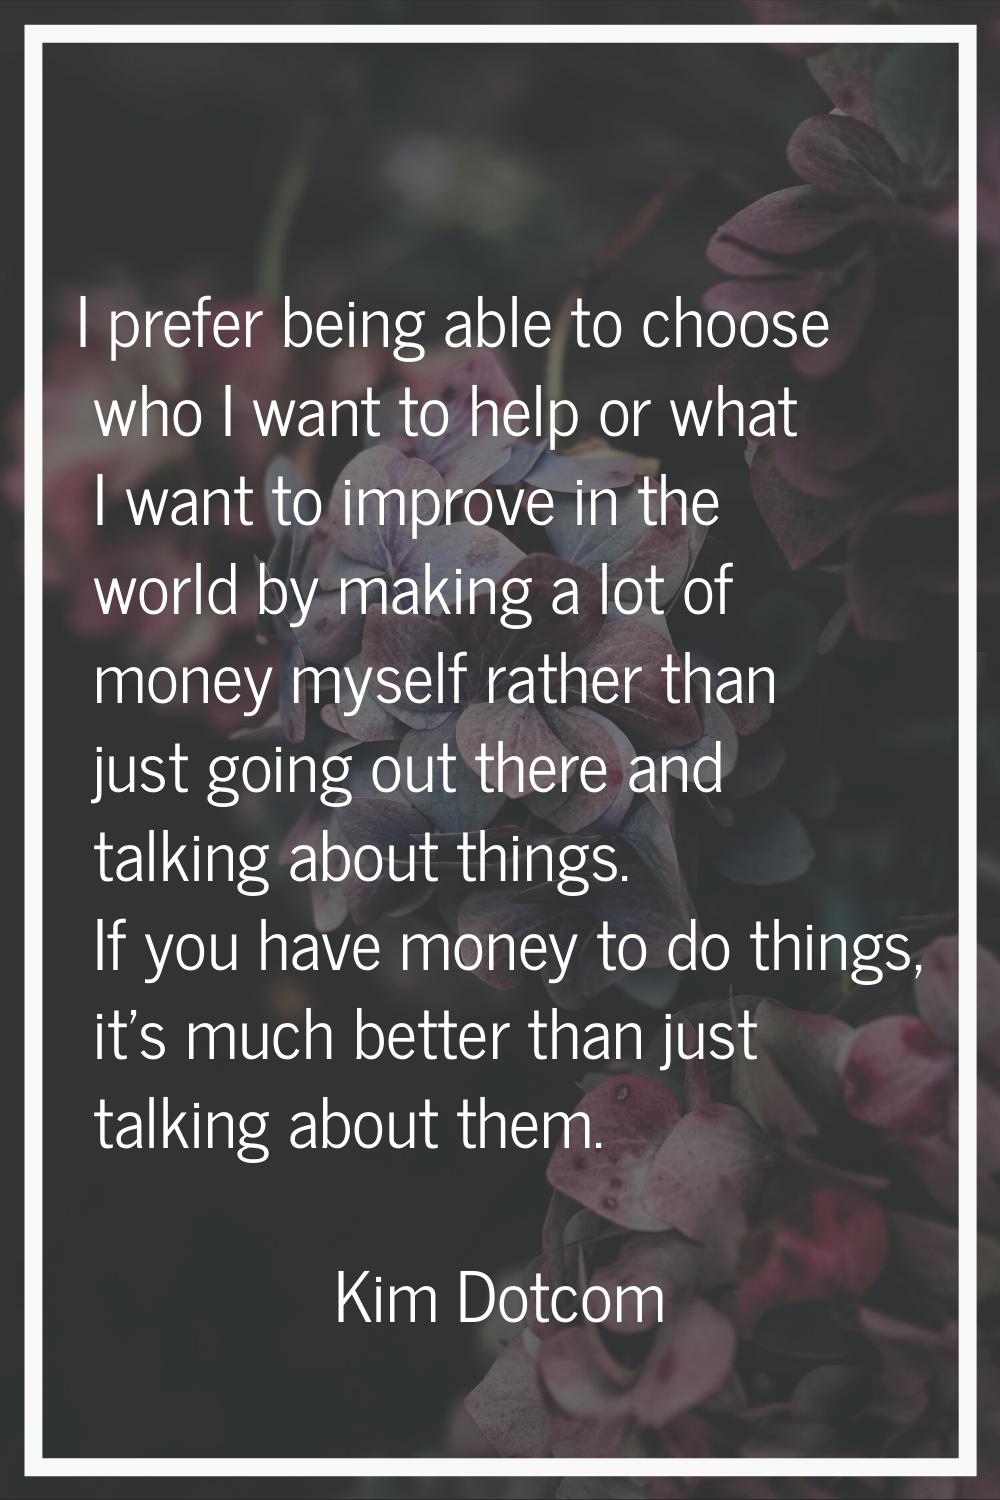 I prefer being able to choose who I want to help or what I want to improve in the world by making a